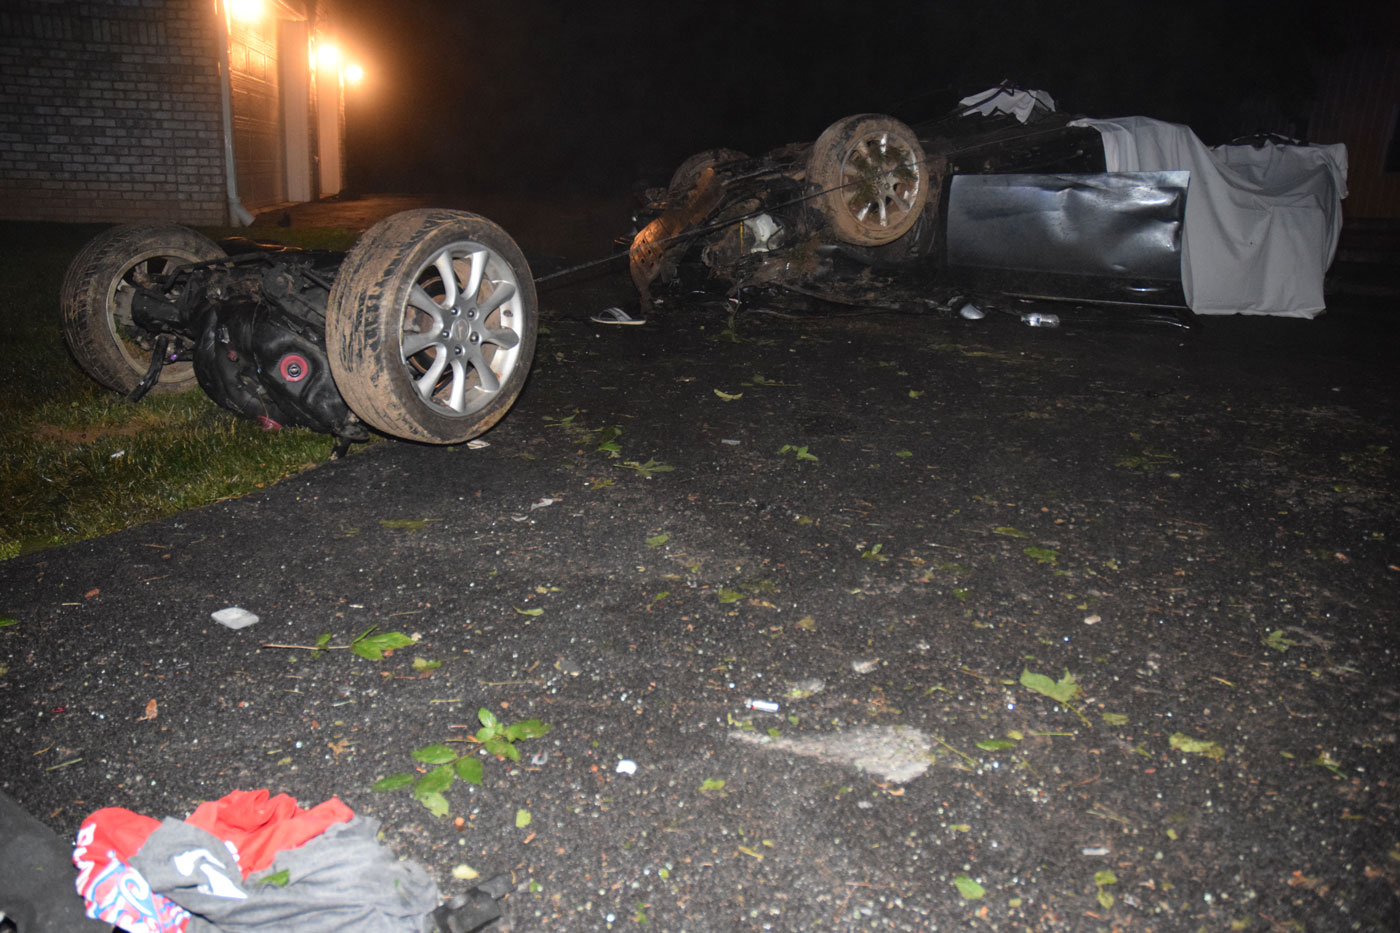 The scene of the crash on the night of June 25, 2015 that killed two teenagers — Calvin Li and Alexander Murk. (Courtesy Montgomery County State's Attorney's Office)